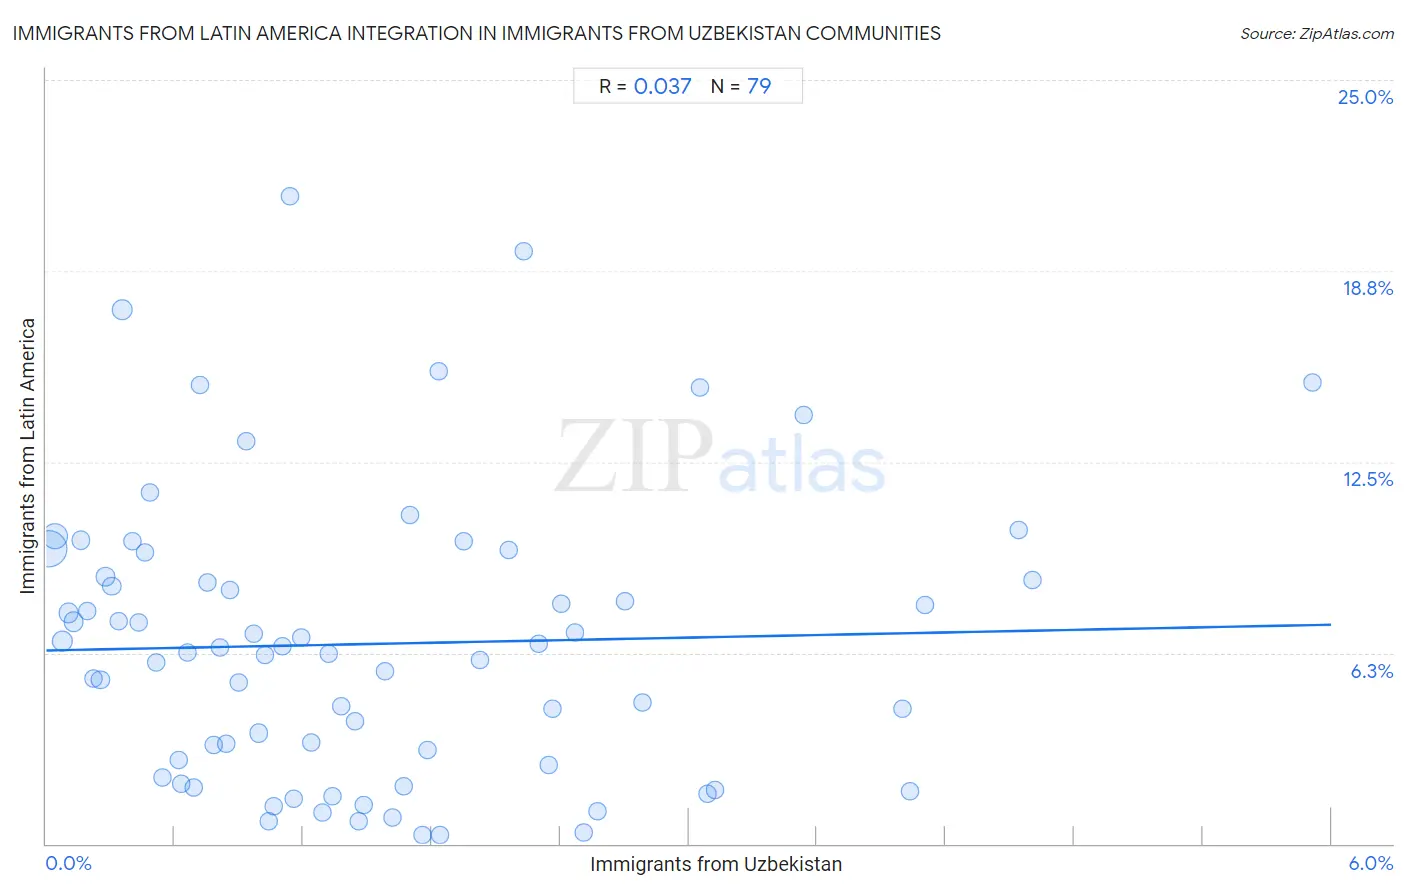 Immigrants from Uzbekistan Integration in Immigrants from Latin America Communities